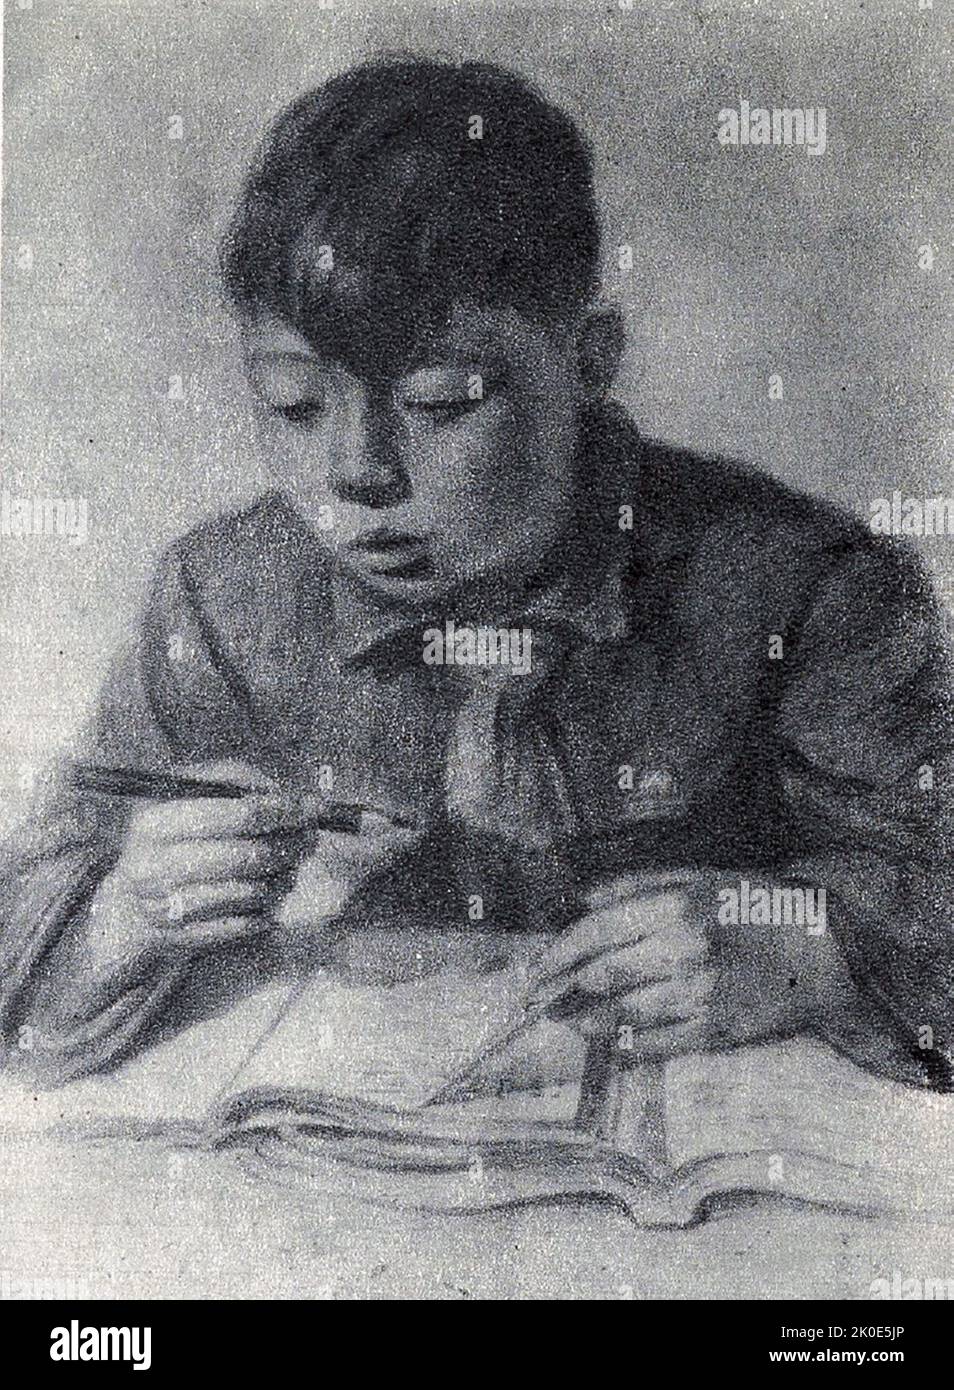 North Korean art: Learning (Pencil) by Choi Jeong-Yeon (18 years old) 1963. Stock Photo